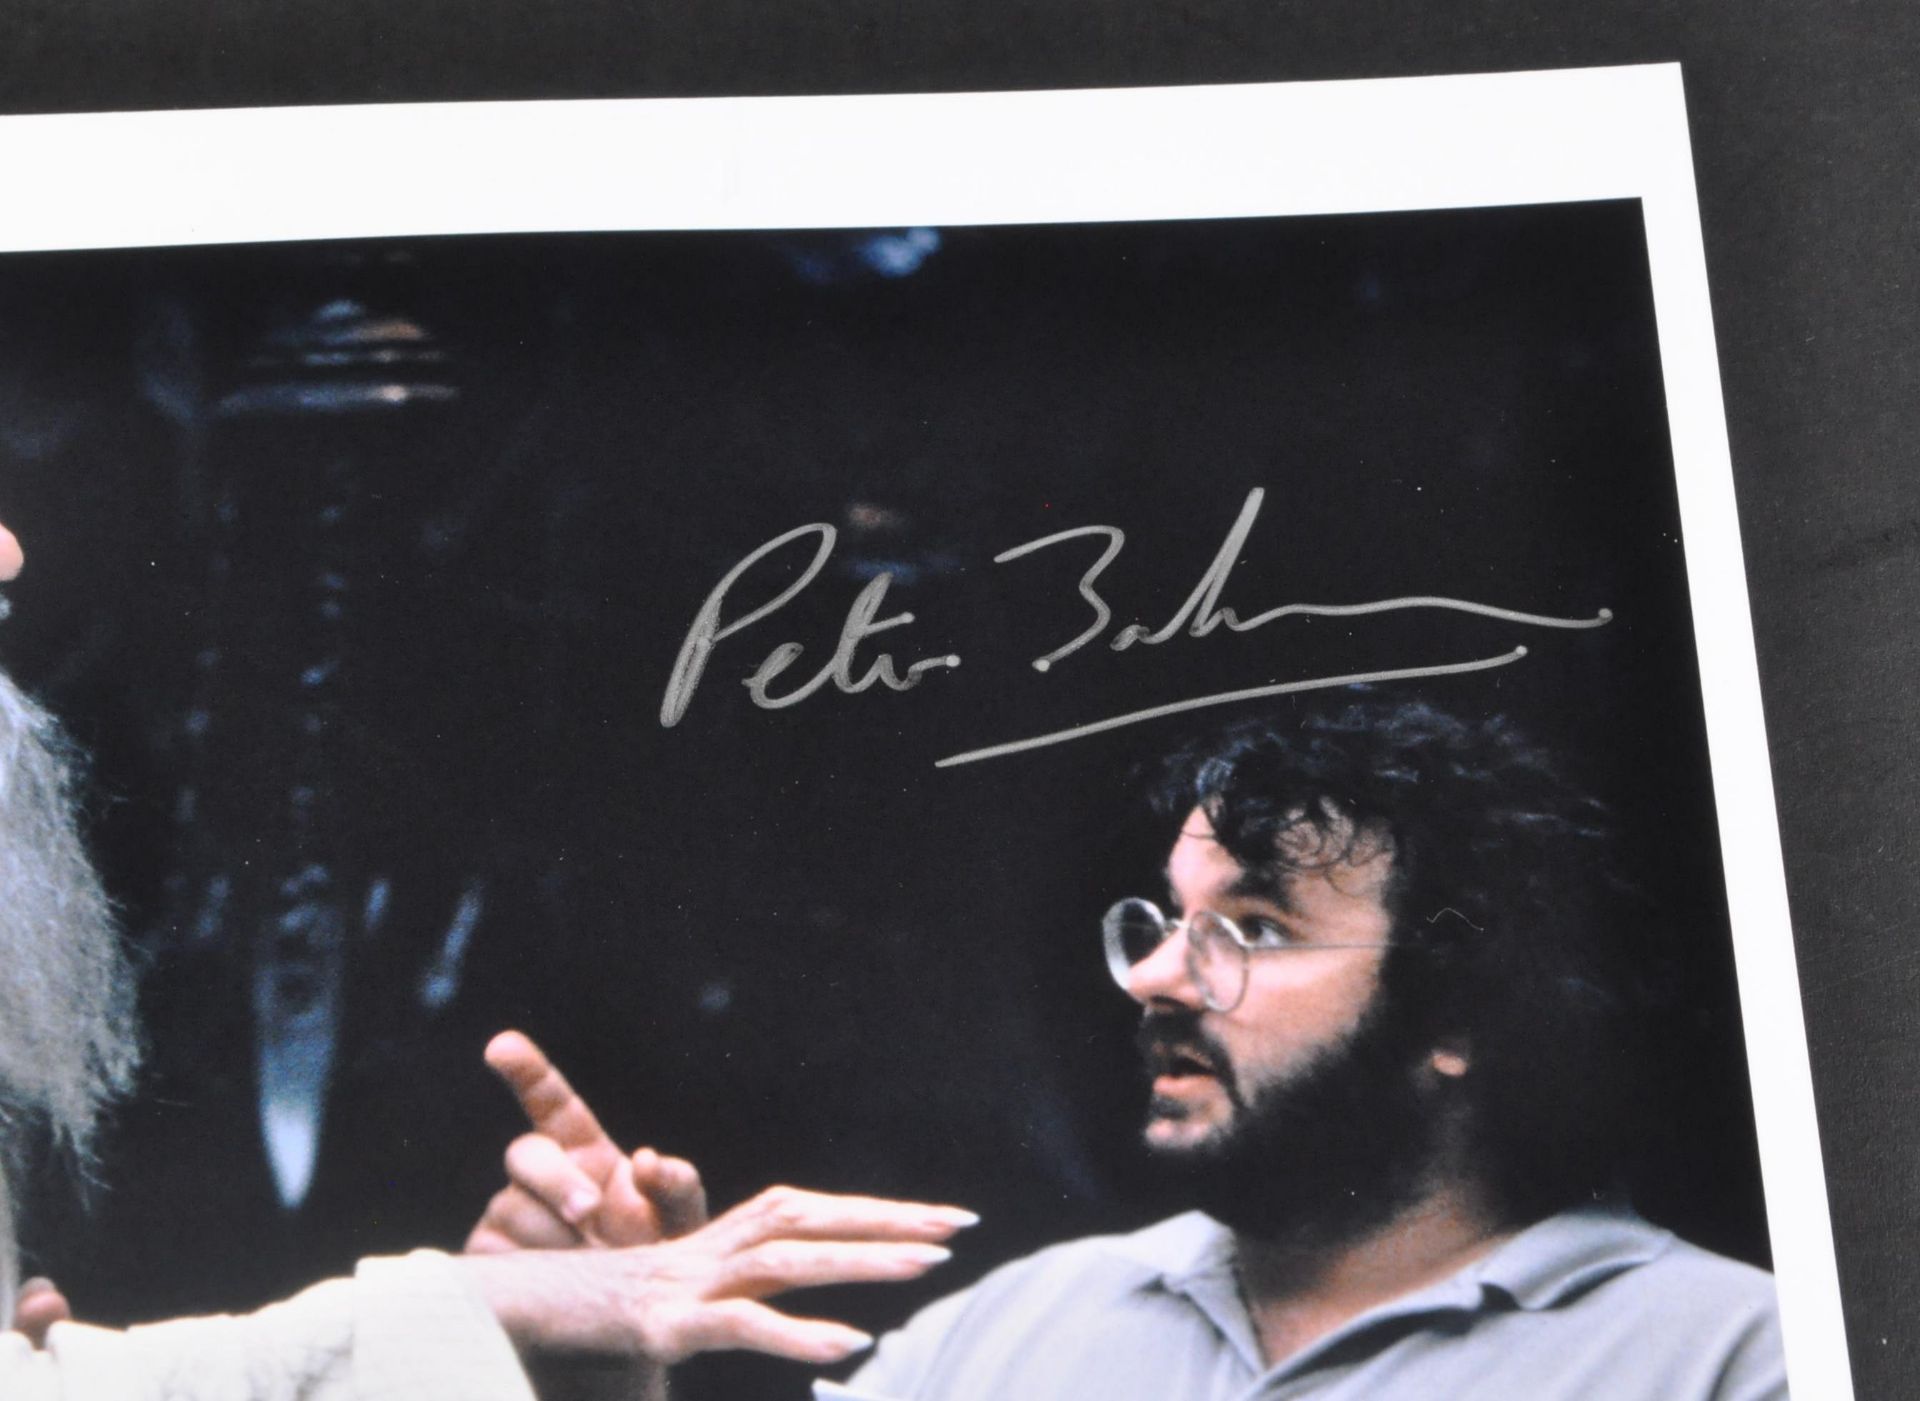 THE LORD OF THE RINGS - PETER JACKSON (DIRECTOR) - SIGNED PHOTO & LETTER - Image 2 of 2